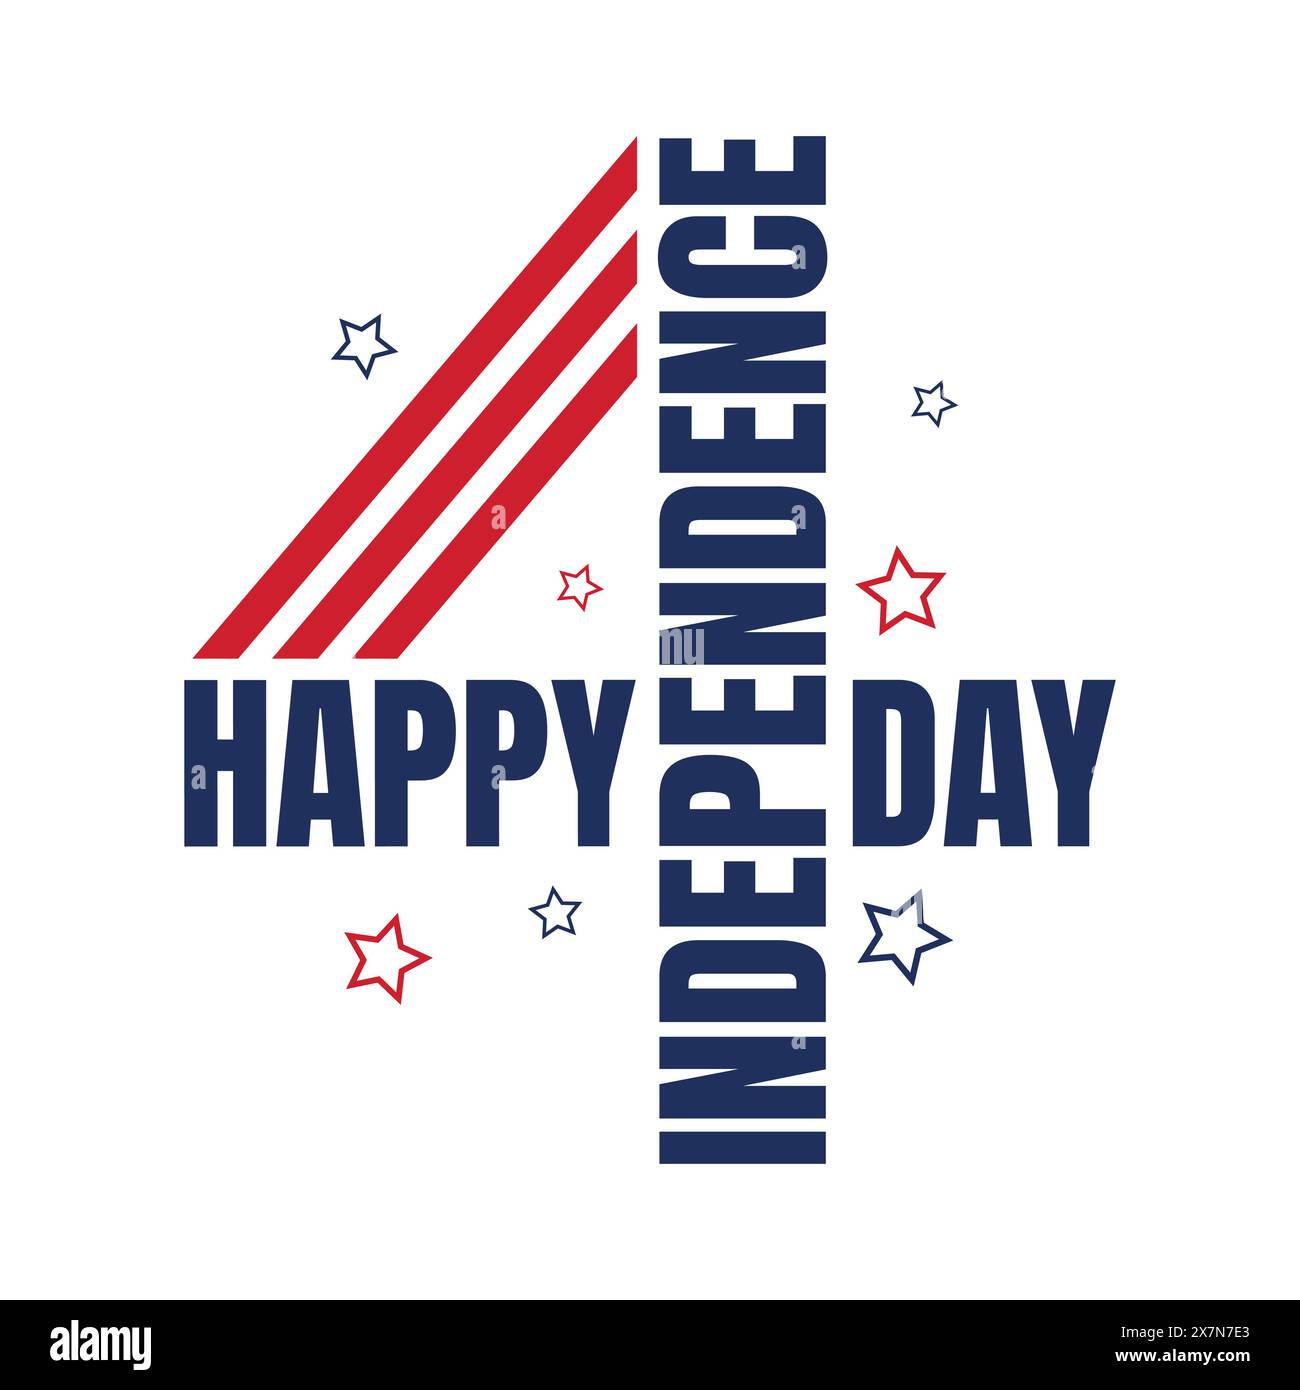 Happy Independence Day creative concept on letter 4. Red and blue color stars. American flag red stripes. 4th of July poster, greeting card, banner Stock Vector